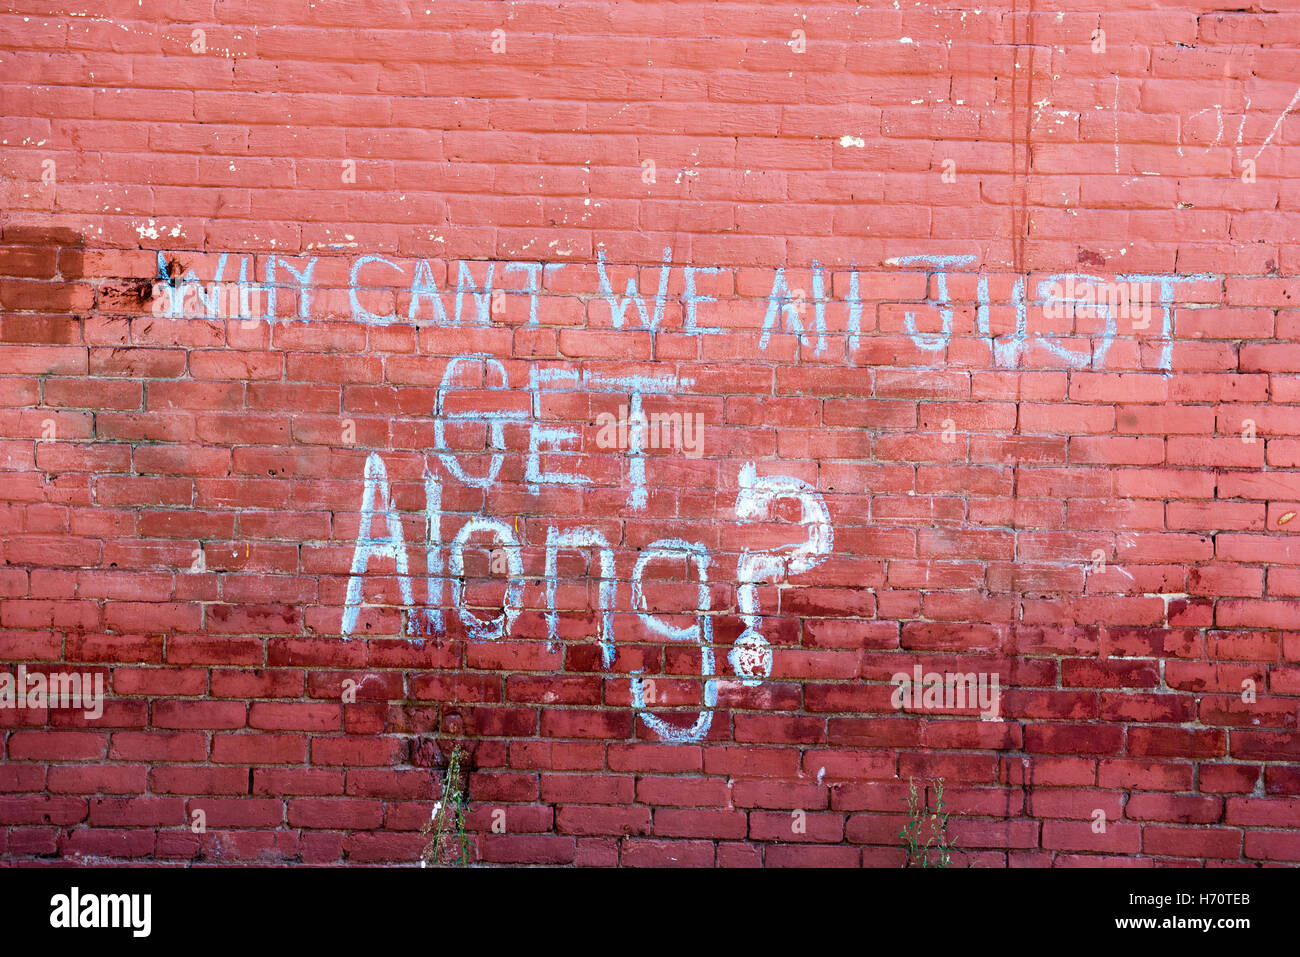 Why Can't We All Get Along written on a wall in an alley in Brattleboro, VT. Stock Photo